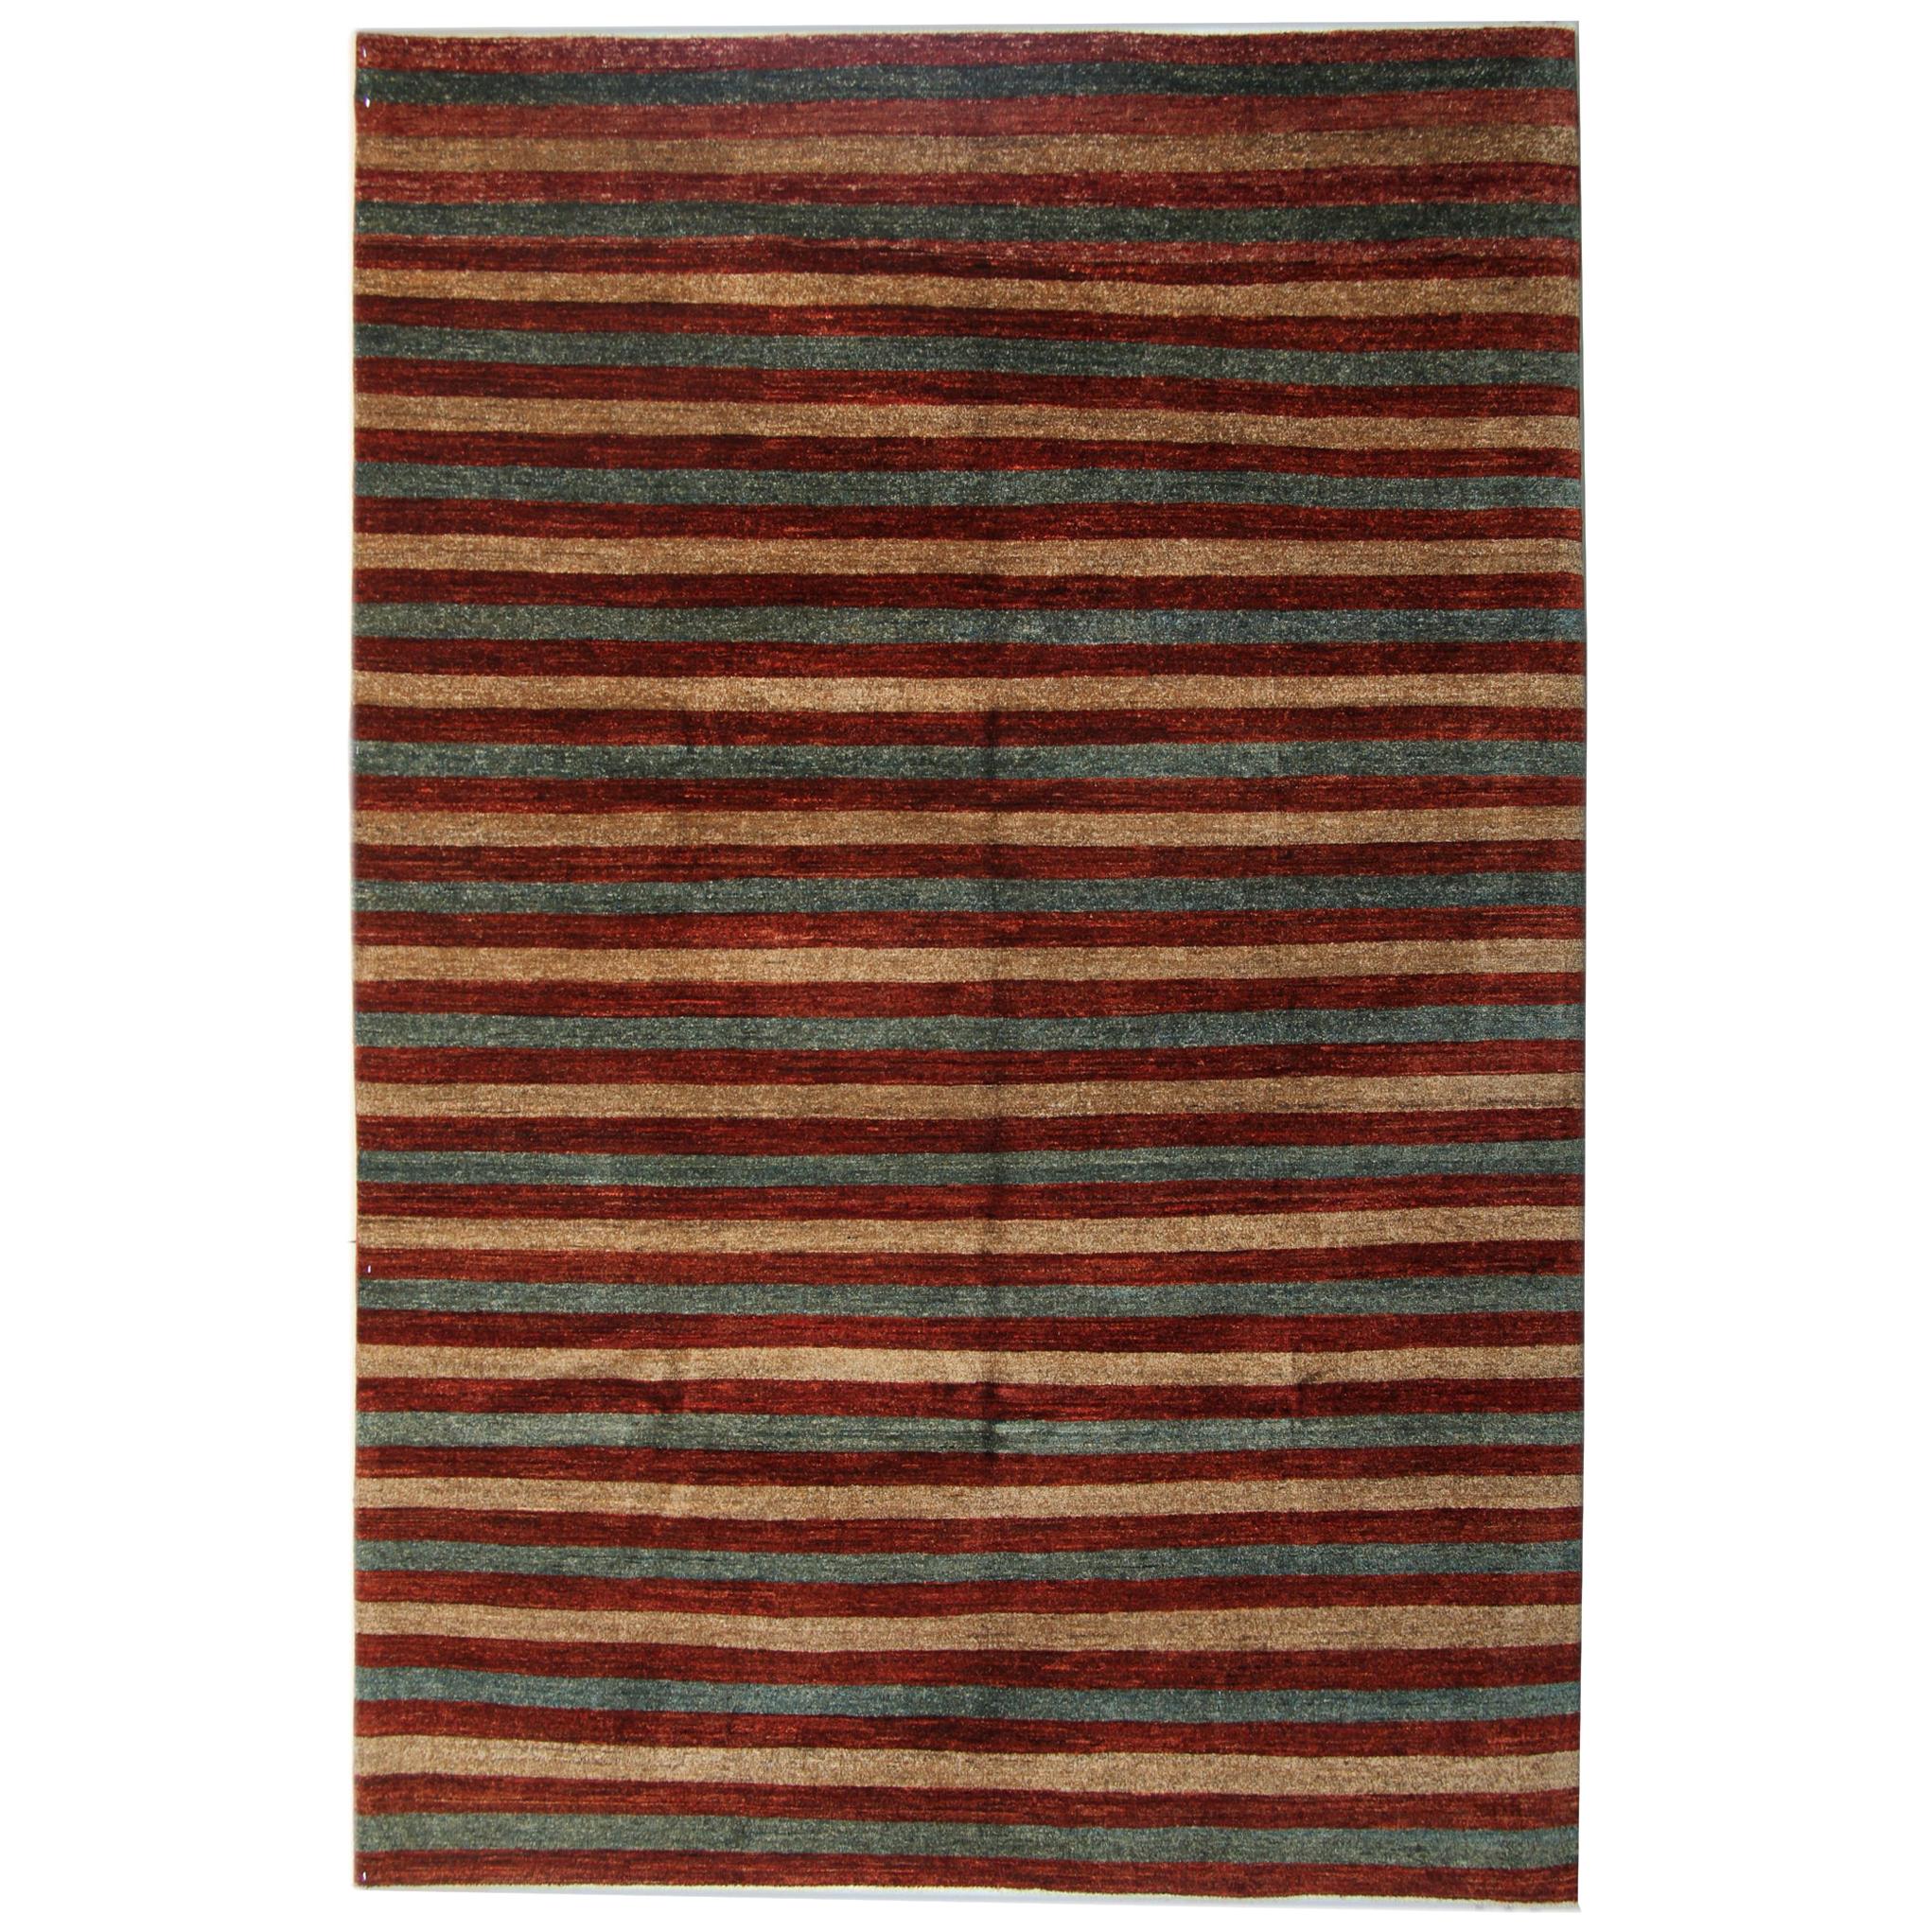 Modern Striped Rug Contemporary Oriental Rugs, Handwoven Carpet for Sale For Sale